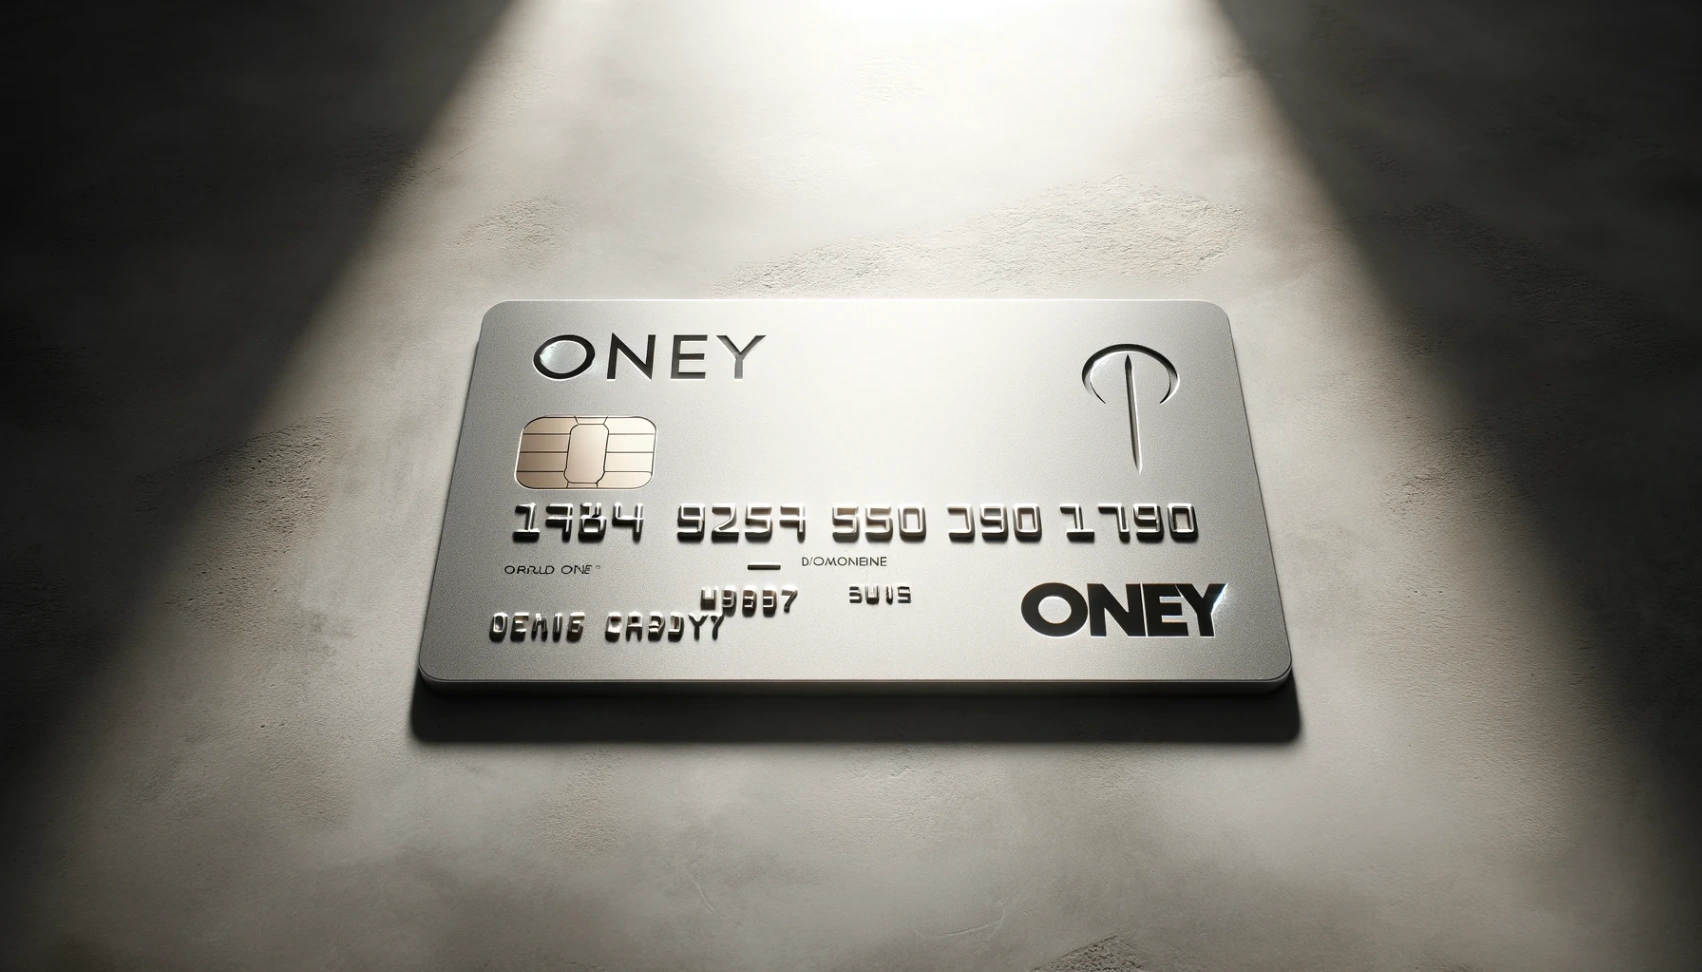 Oney Credit Card Application: Easy Online Step-by-Step